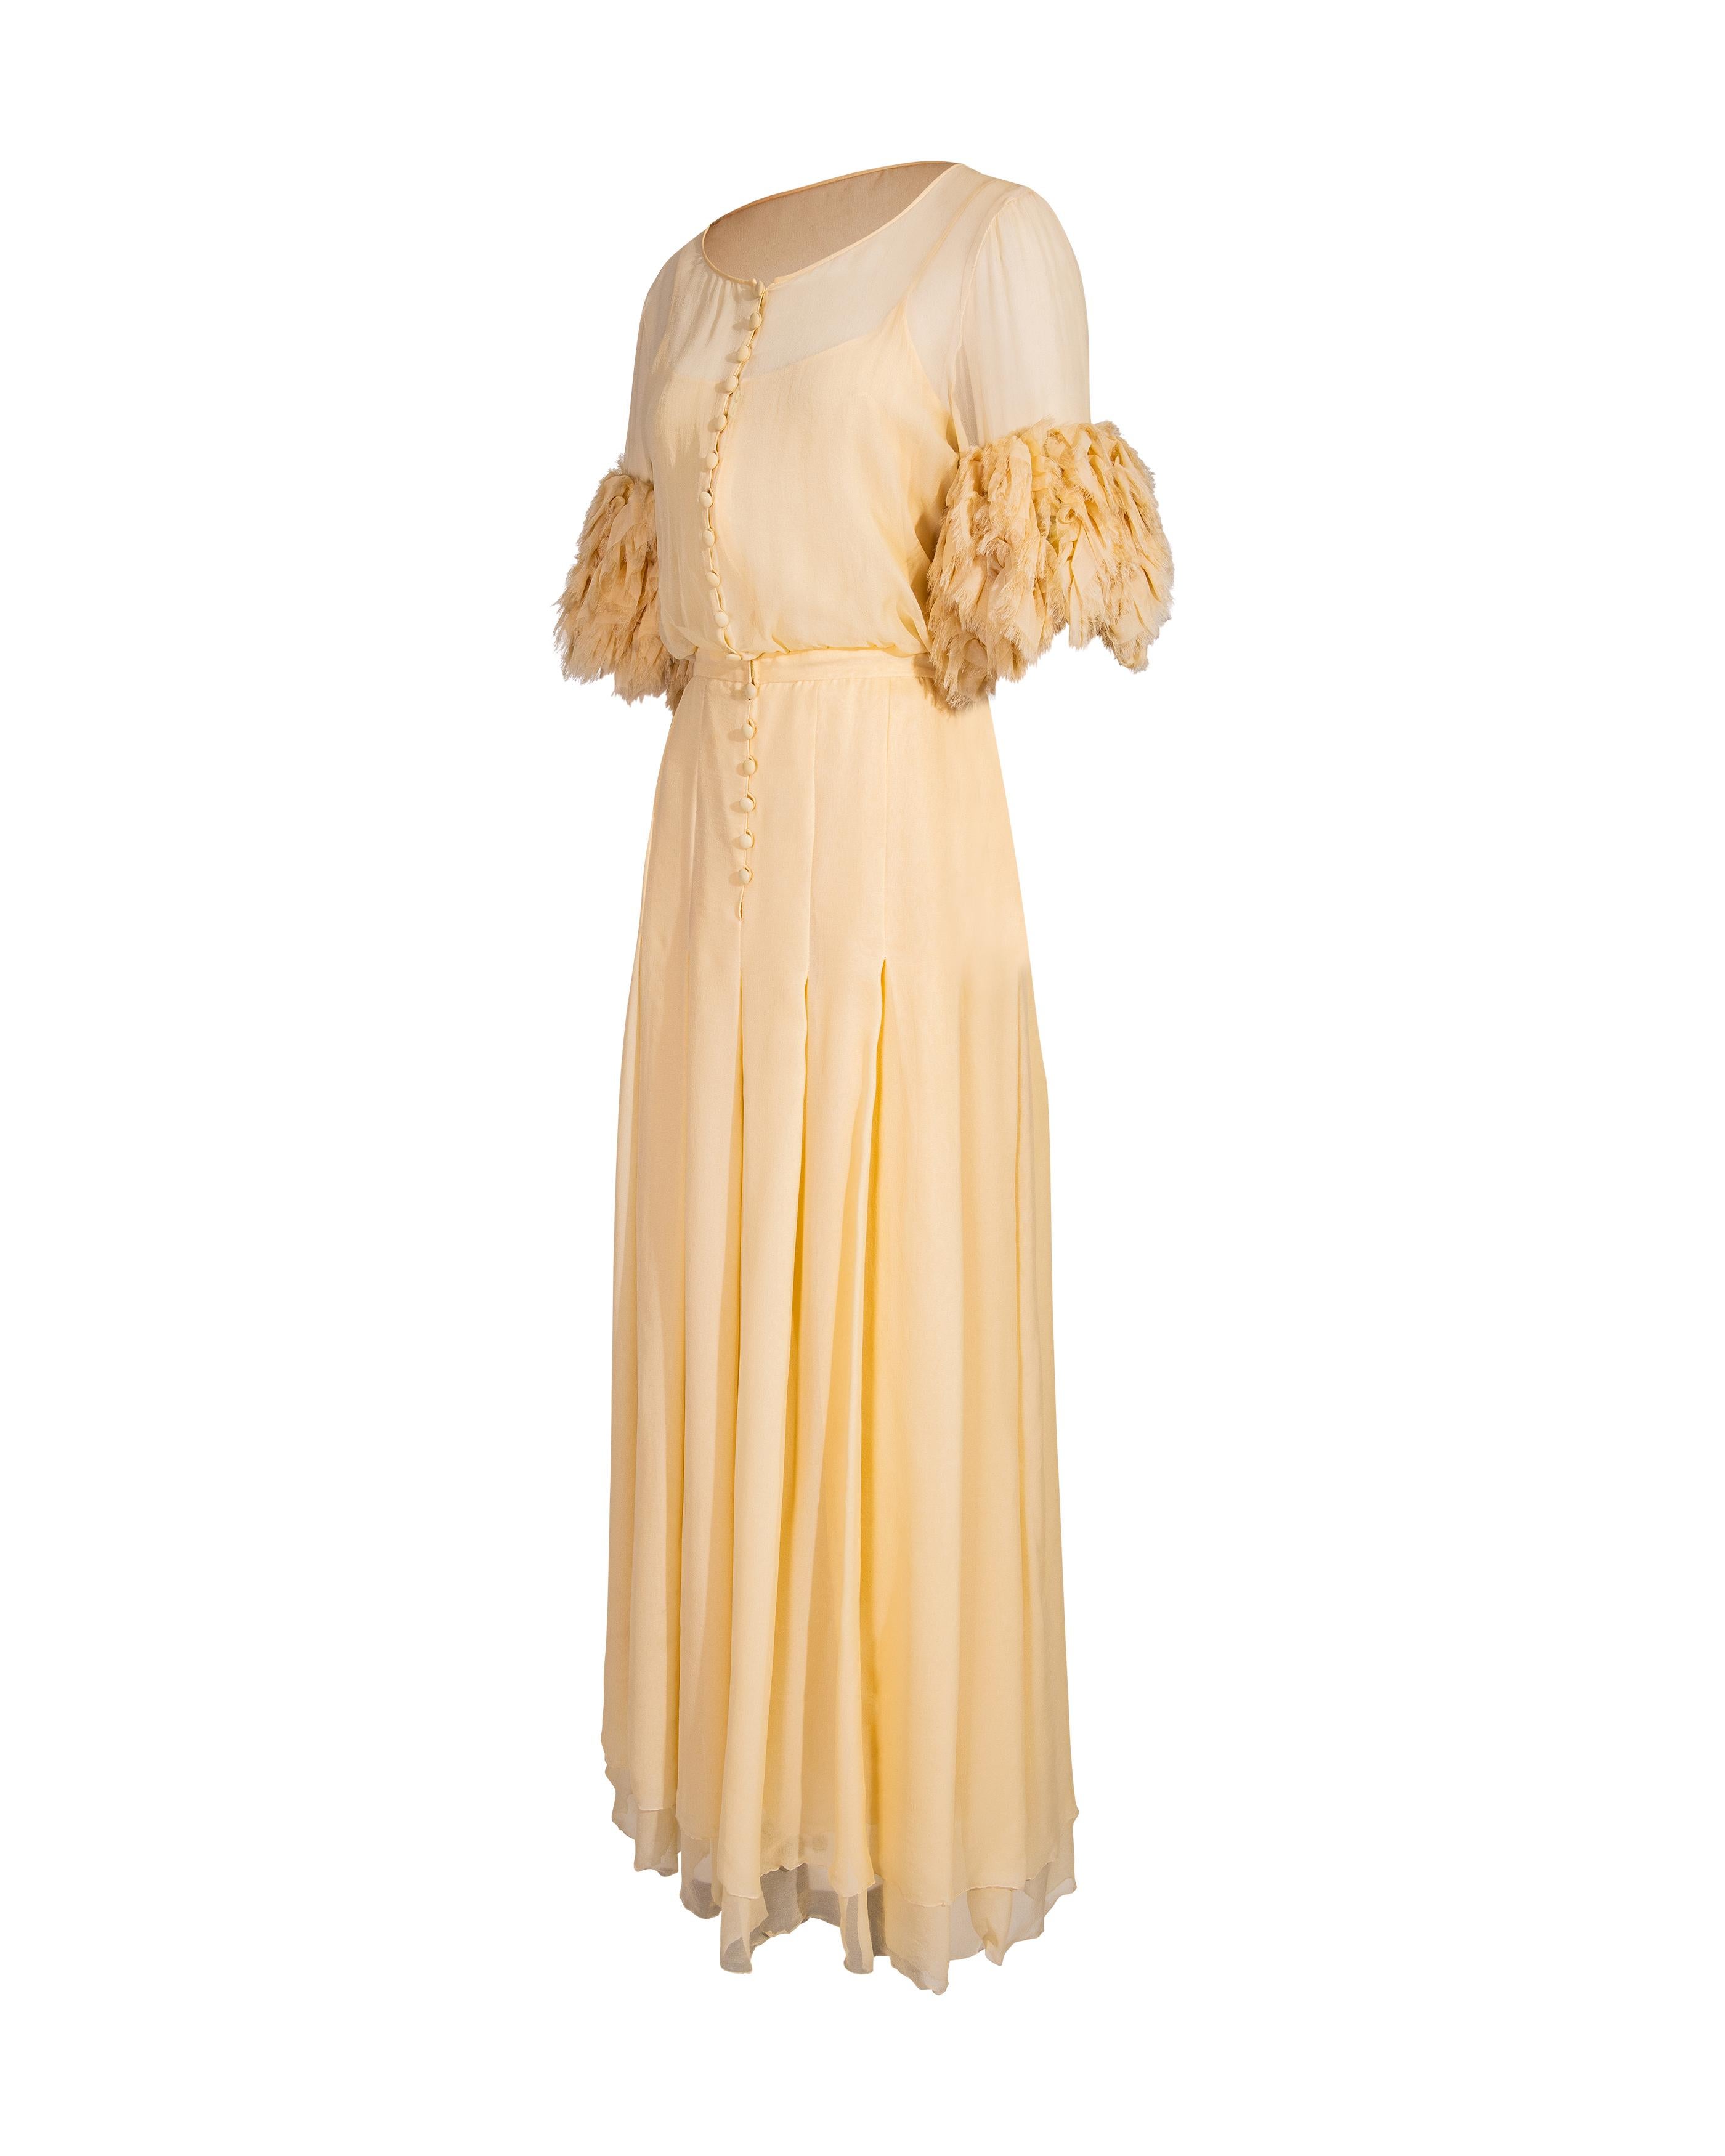 S/S 1984 Chanel by Karl Lagerfeld Butter Yellow Silk Chiffon Gown In Excellent Condition In North Hollywood, CA